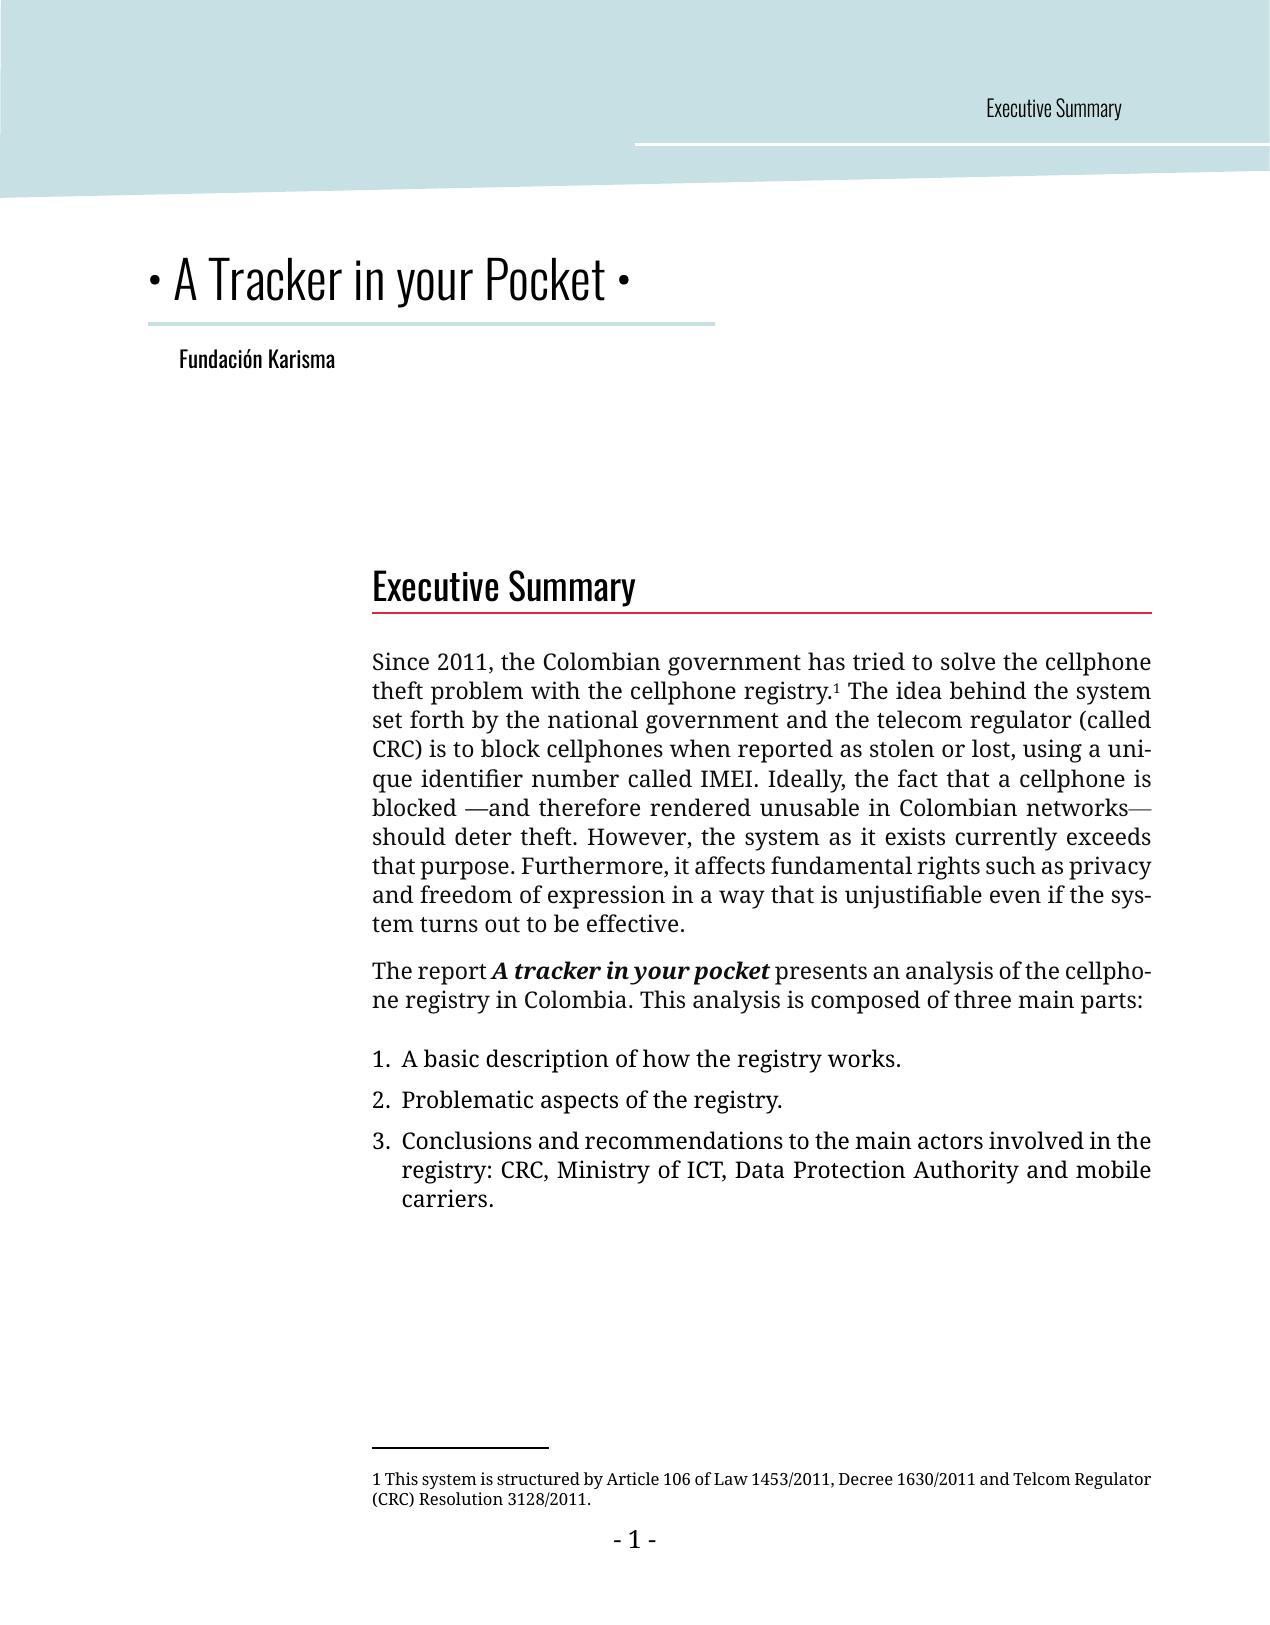 A Tracker In Your Pocket, Executive Summary